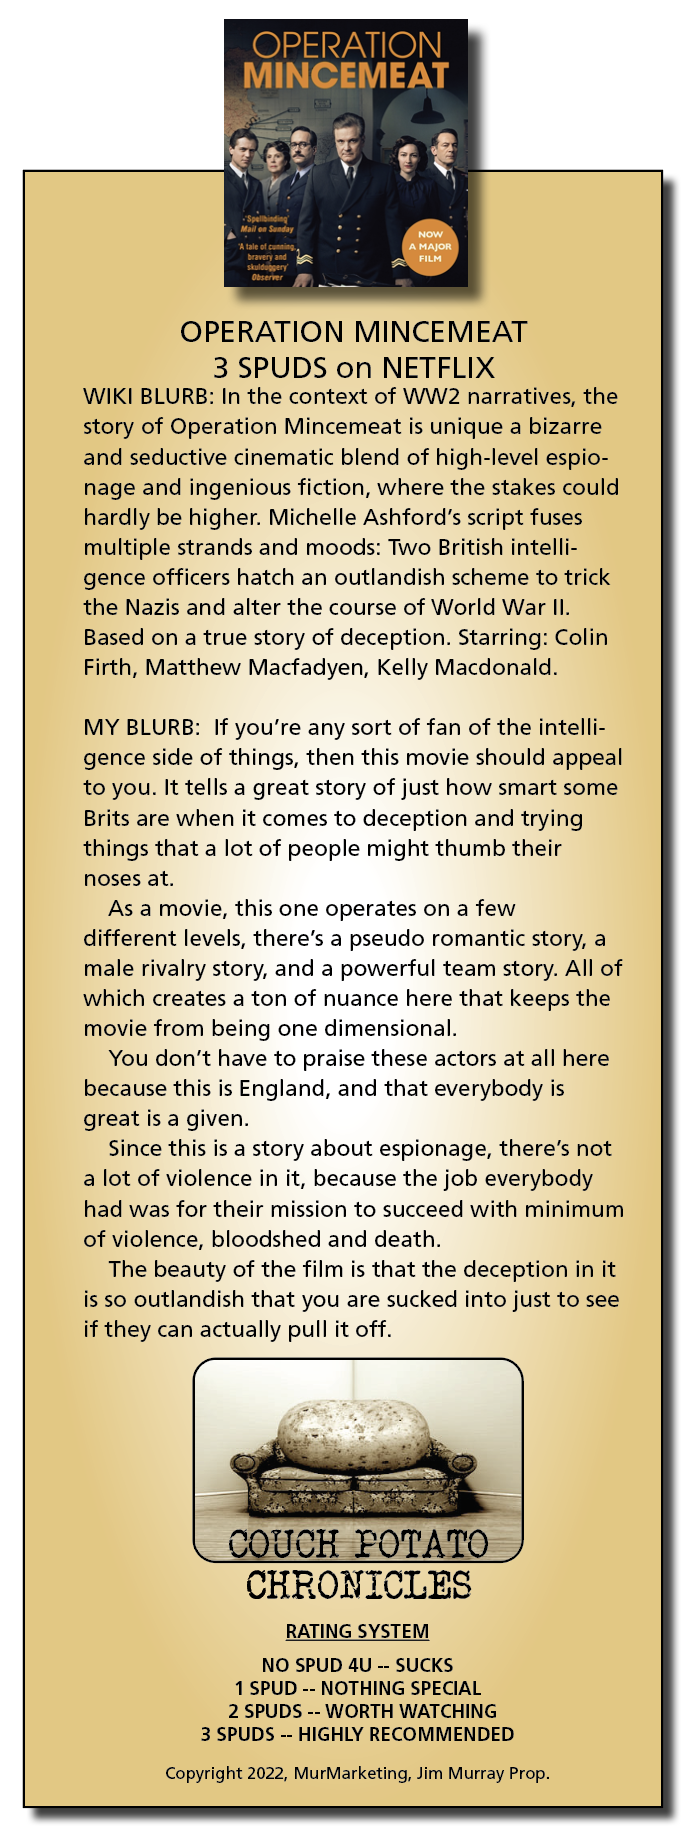 OPERATION
MINCEMEAT

   

OPERATION MINCEMEAT
3 SPUDS on NETFLIX
WIKI BLURB: In the context of WW2 narratives, the
story of Operation Mincemeat is unique a bizarre
and seductive cinematic blend of high-level espio-
nage and ingenious fiction, where the stakes could
hardly be higher. Michelle Ashford’s script fuses
multiple strands and moods: Two British intelli-
gence officers hatch an outlandish scheme to trick
the Nazis and alter the course of World War II.
Based on a true story of deception. Starring: Colin
Firth, Matthew Macfadyen, Kelly Macdonald.

MY BLURB: If you're any sort of fan of the intelli-
gence side of things, then this movie should appeal
to you. It tells a great story of just how smart some
Brits are when it comes to deception and trying
things that a lot of people might thumb their
noses at.

As a movie, this one operates on a few
different levels, there's a pseudo romantic story, a
male rivalry story, and a powerful team story. All of
which creates a ton of nuance here that keeps the
movie from being one dimensional.

You don’t have to praise these actors at all here
because this is England, and that everybody is
great is a given.

Since this is a story about espionage, there's not
a lot of violence in it, because the job everybody
had was for their mission to succeed with minimum
of violence, bloodshed and death.

The beauty of the film is that the deception in it
is so outlandish that you are sucked into just to see
if they can actually pull it off.

OUCH POTATO
CHRONICLES

 

RATING SYSTEM
NO SPUD 4U -- SUCKS
1 SPUD -- NOTHING SPECIAL
2 SPUDS -- WORTH WATCHING
3 SPUDS -- HIGHLY RECOMMENDED

Copyright 2022, MurMarketing, Jim Murray Prop